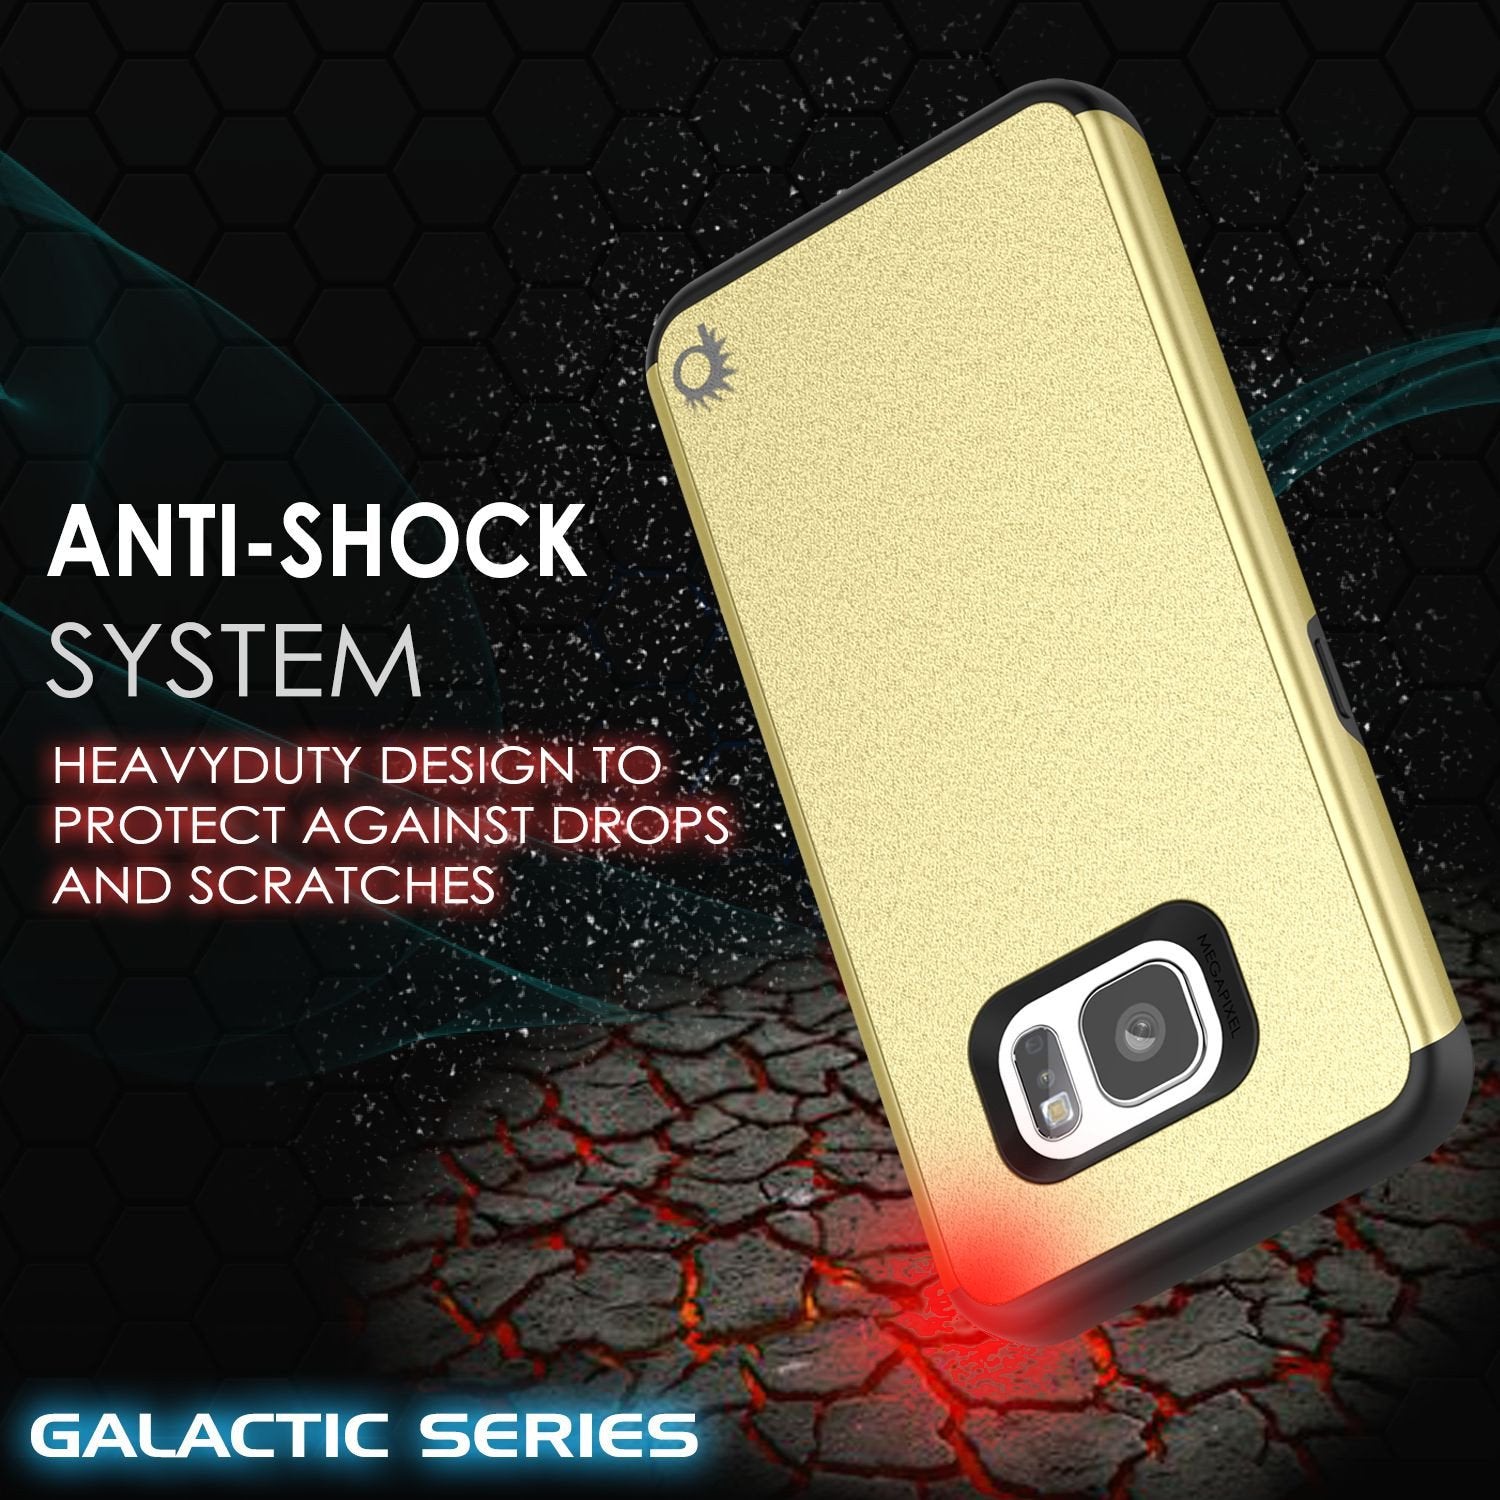 Galaxy s7 Case PunkCase Galactic Gold Series Slim Armor Soft Cover Case w/ Tempered Glass